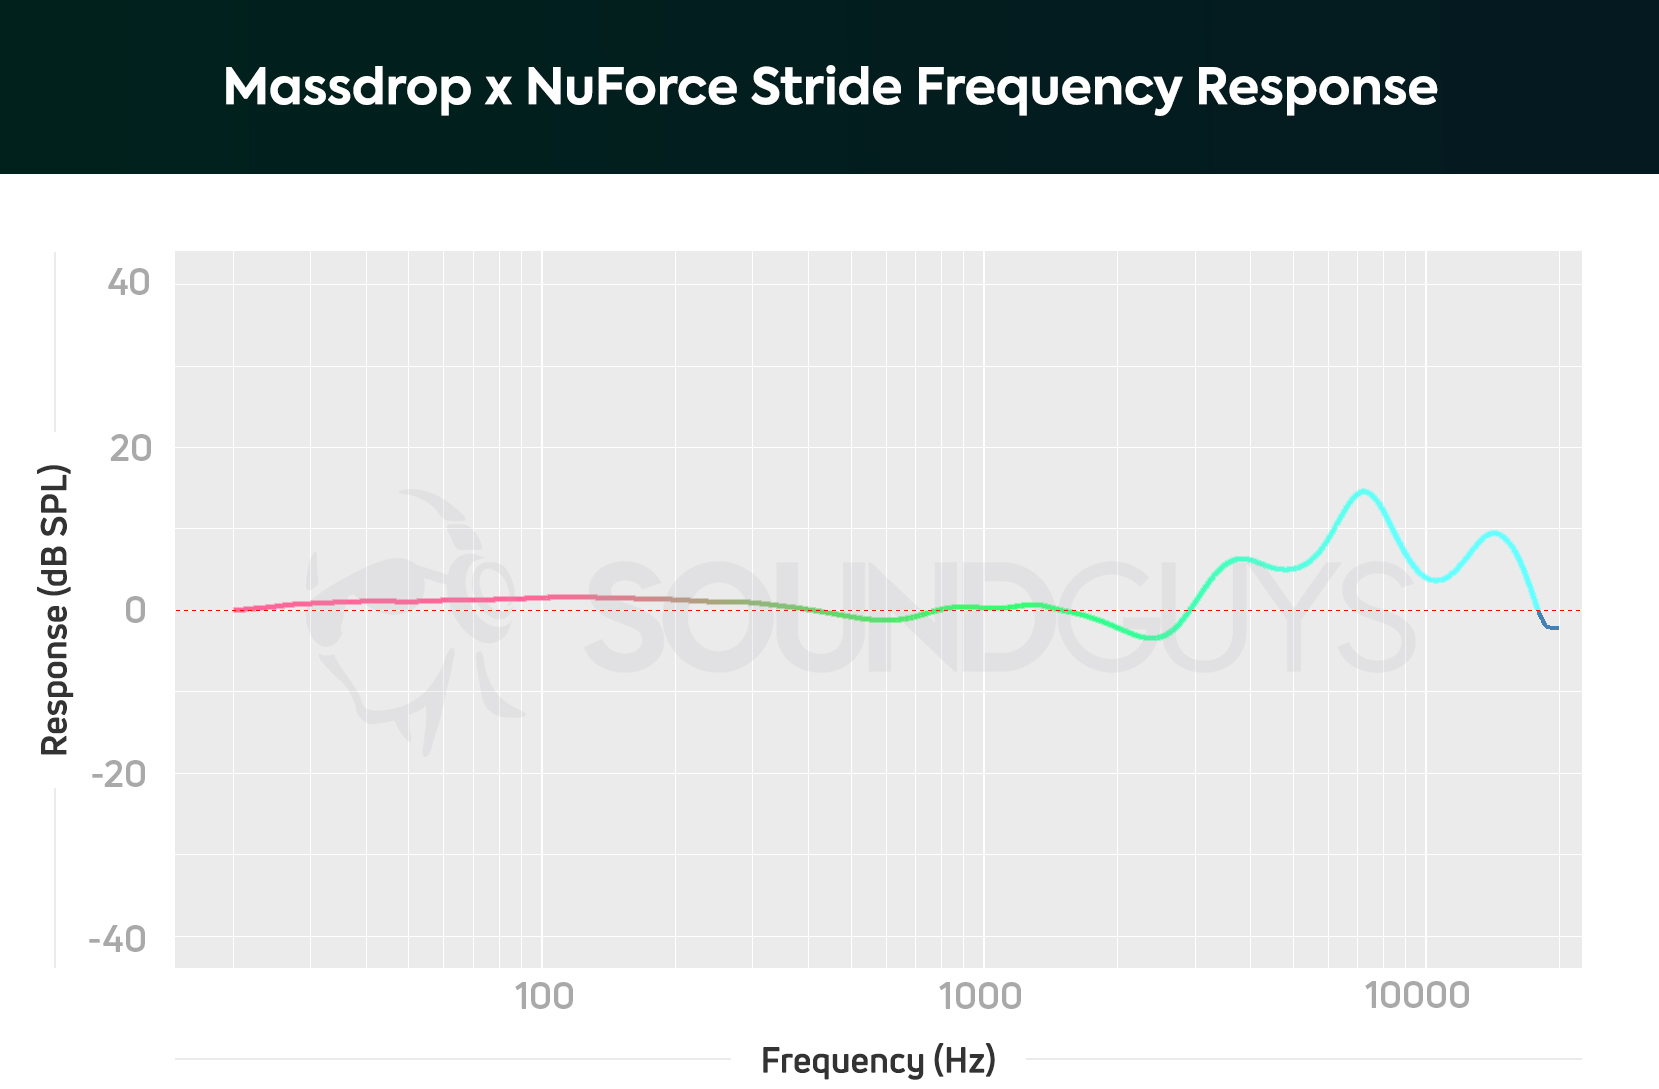 Frequency response chart of the Massdrop x NuForce Stride wireless earbuds.